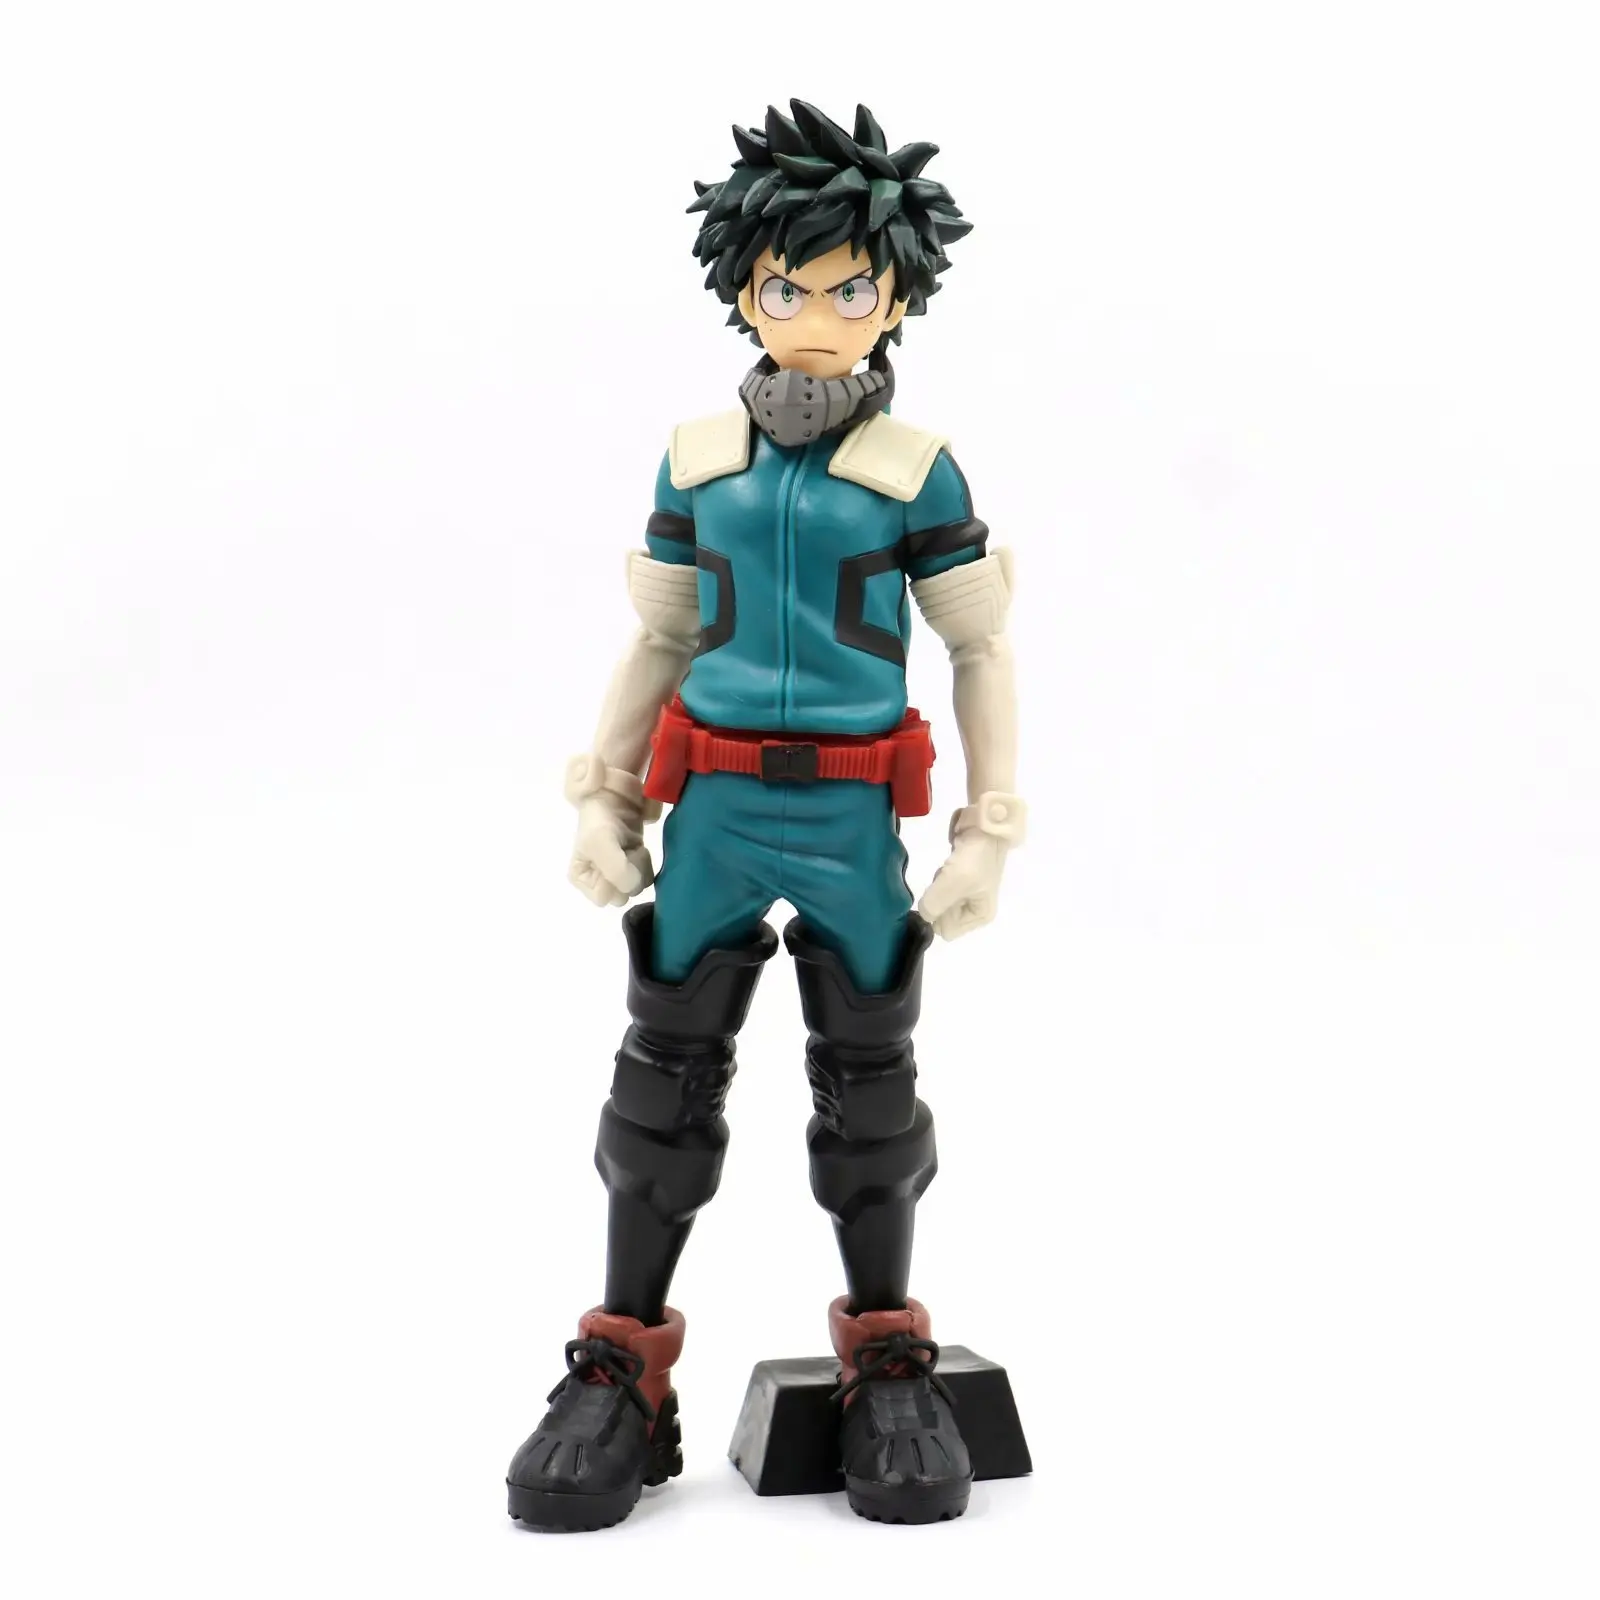 

25cm Anime My Hero Academia Figure PVC Age of Heroes Figurine Deku Action Collectible Model Decorations Doll Toys For Children